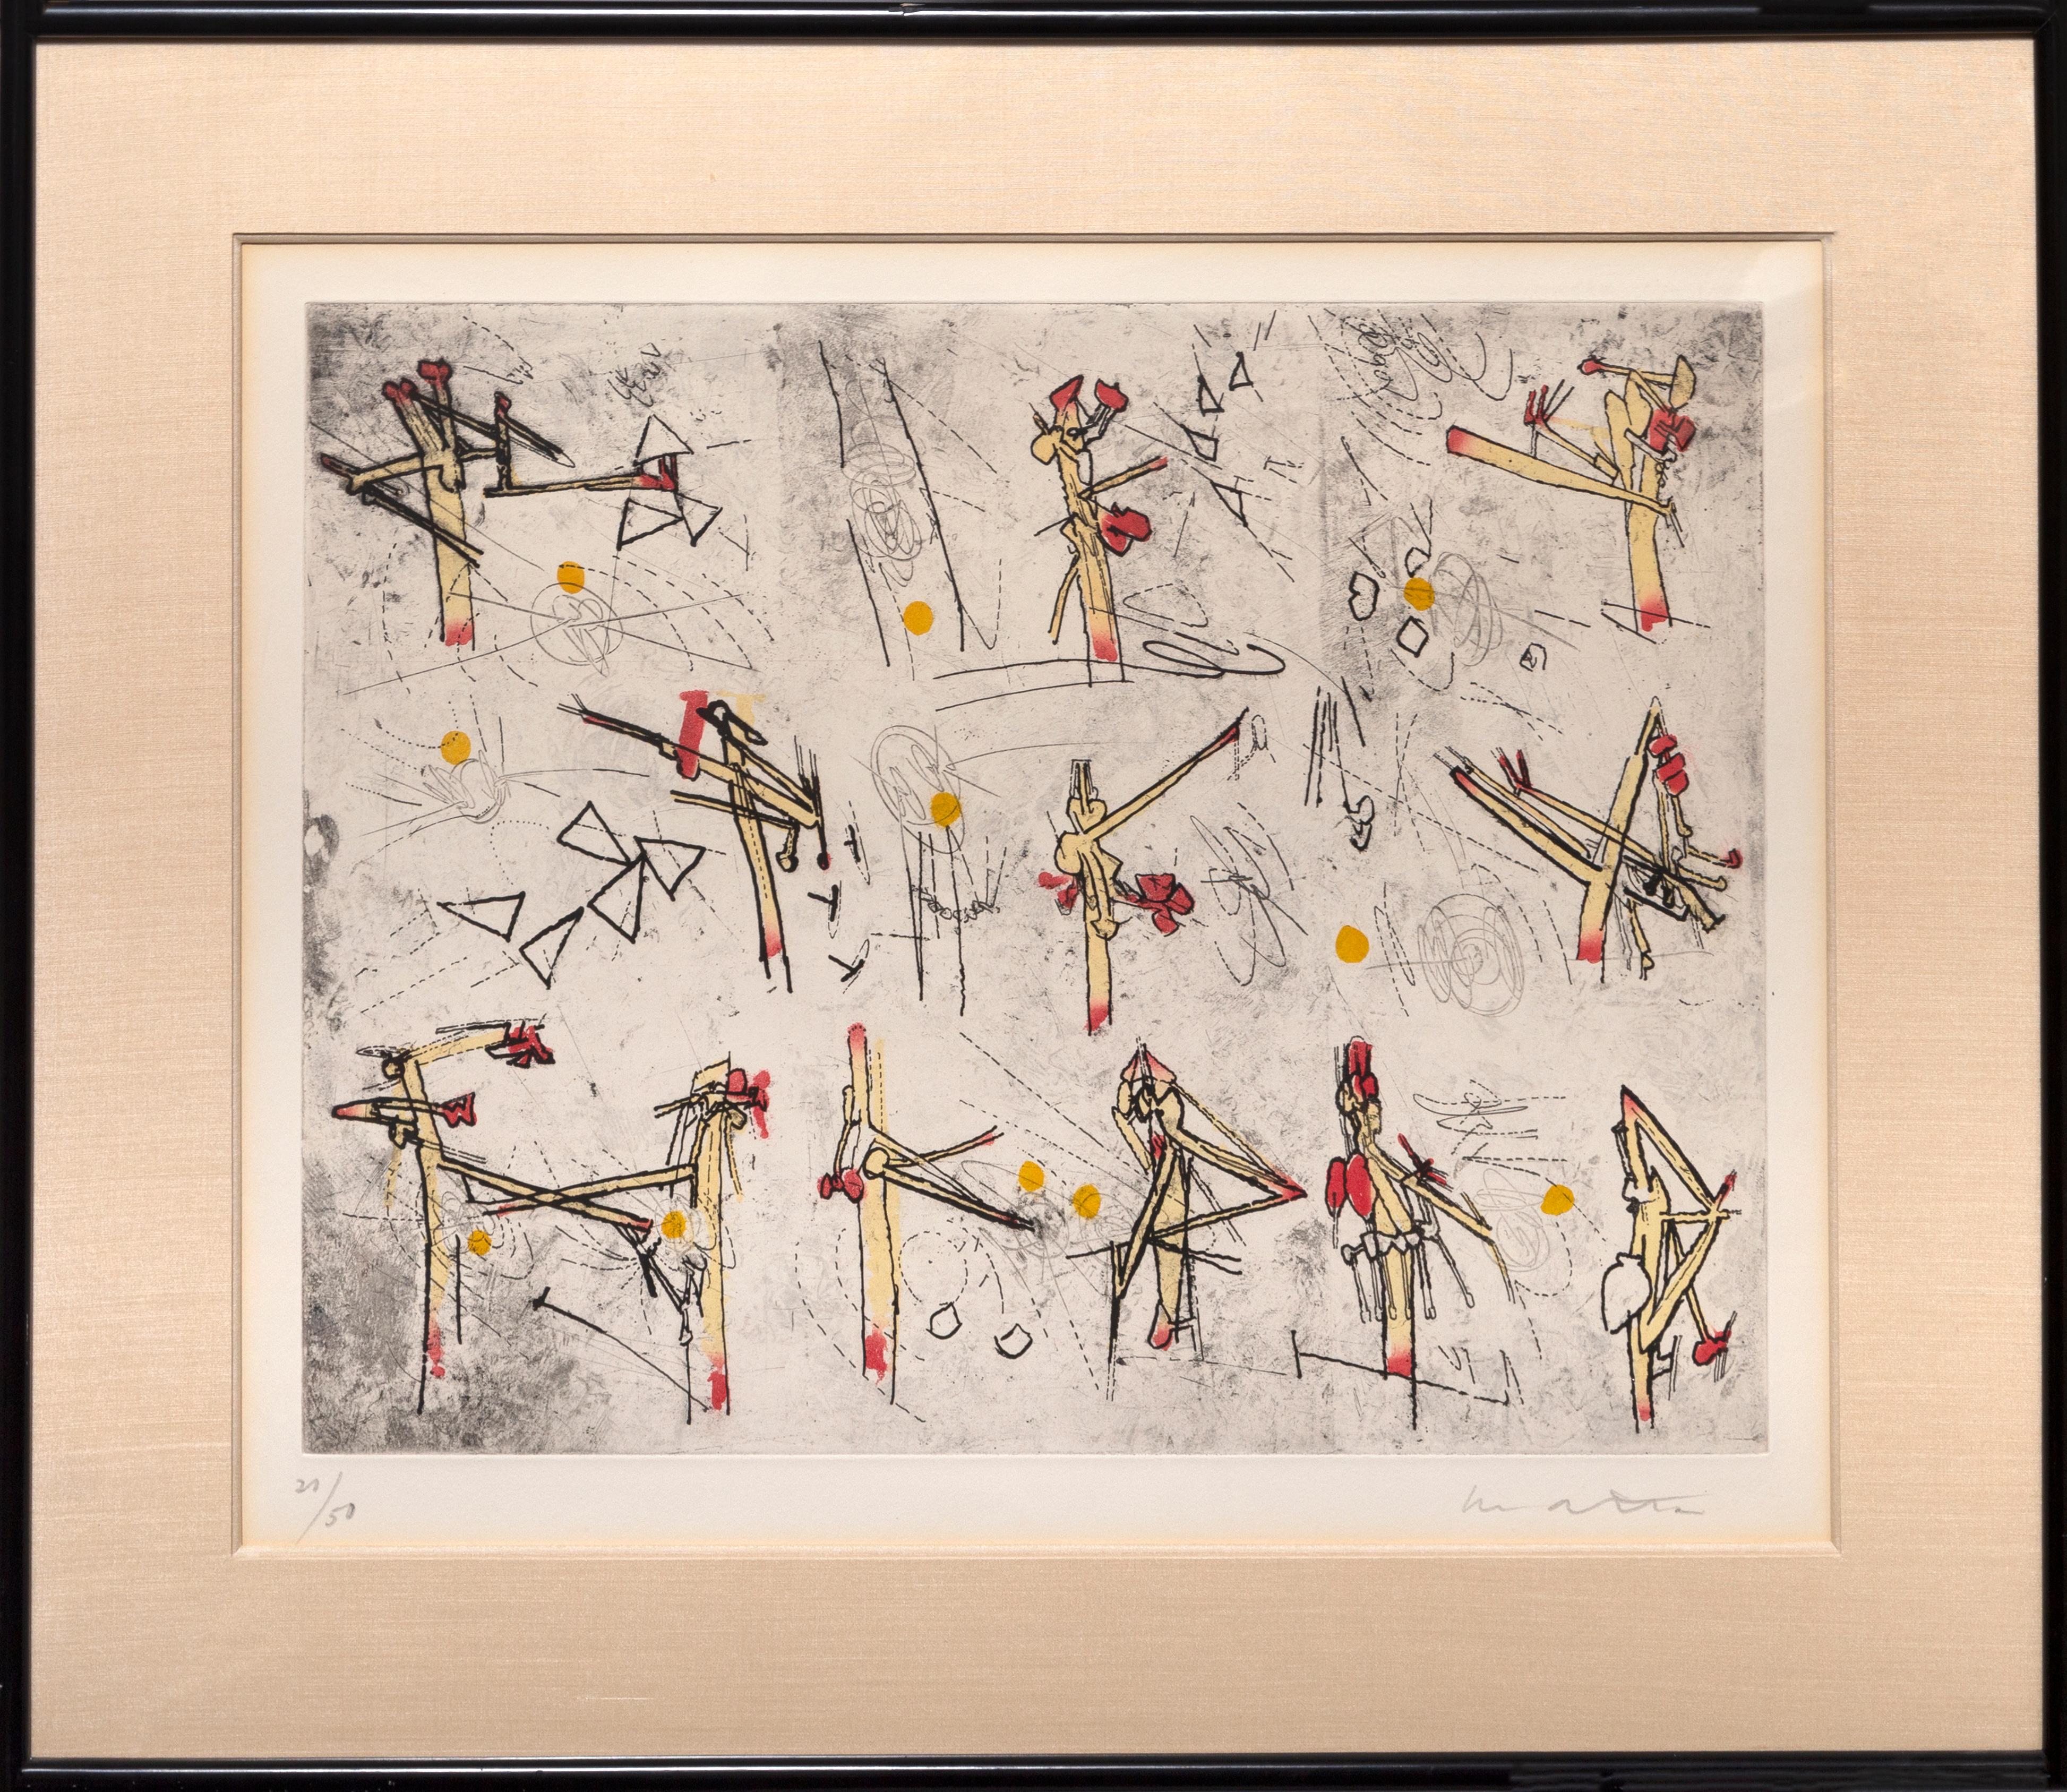 Cosmicstrip I by Roberto Matta, Chilean (1911–2002)
Date: 1959
Etching, signed and numbered in pencil
Edition of 21/50
Image Size: 14.75 x 19.25 inches
Frame Size: 23.75 x 28 inches
Printer: Atelier Georges Visat
Publisher: Editions Allan Frumkin